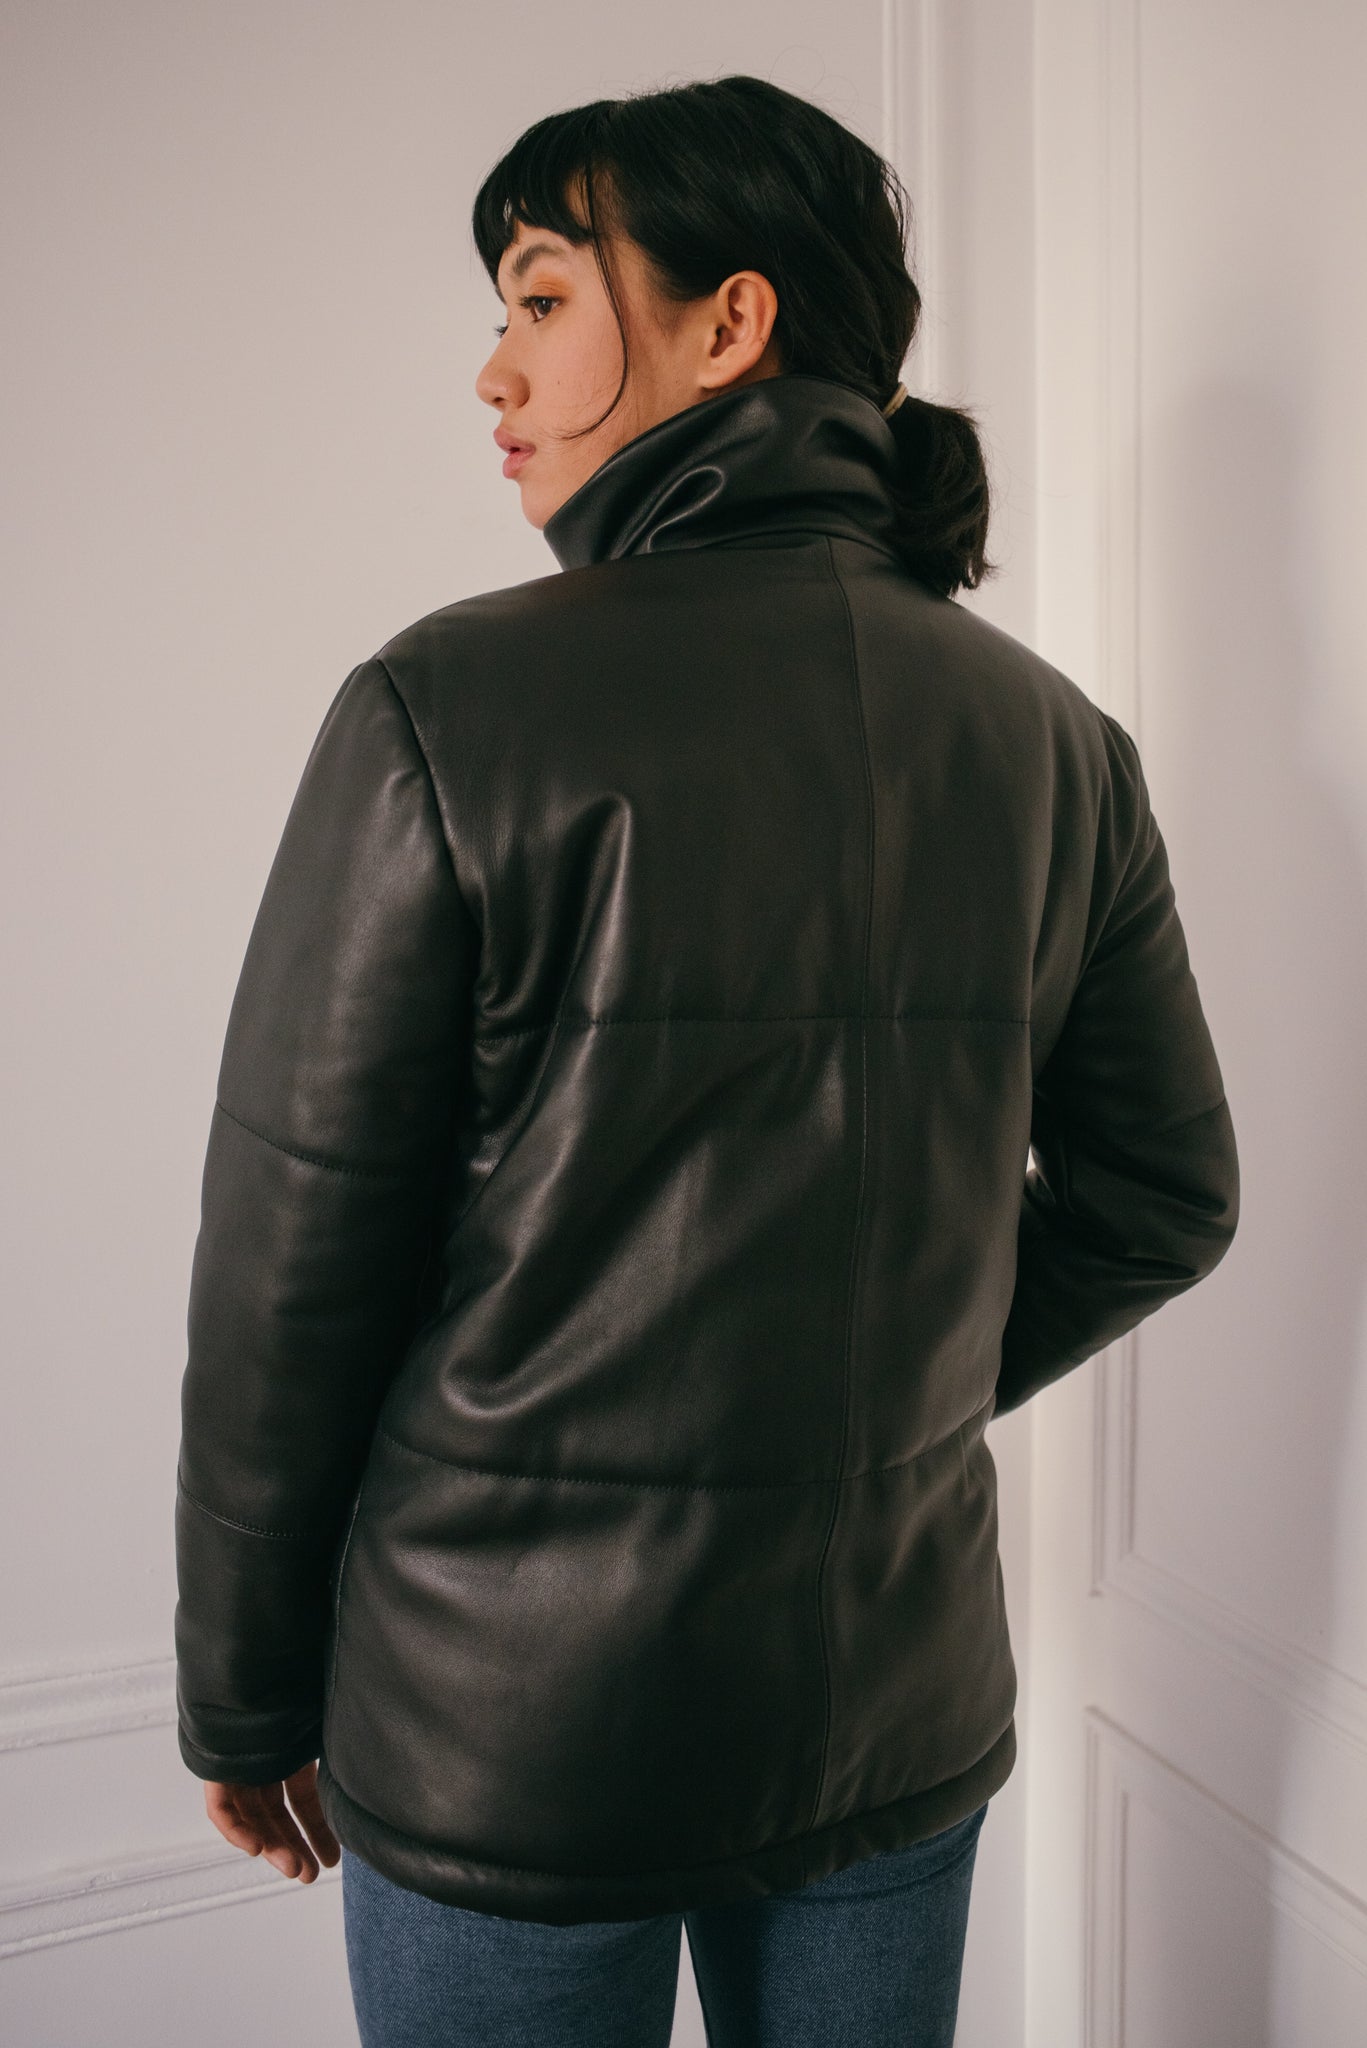 The leather puffer jacket